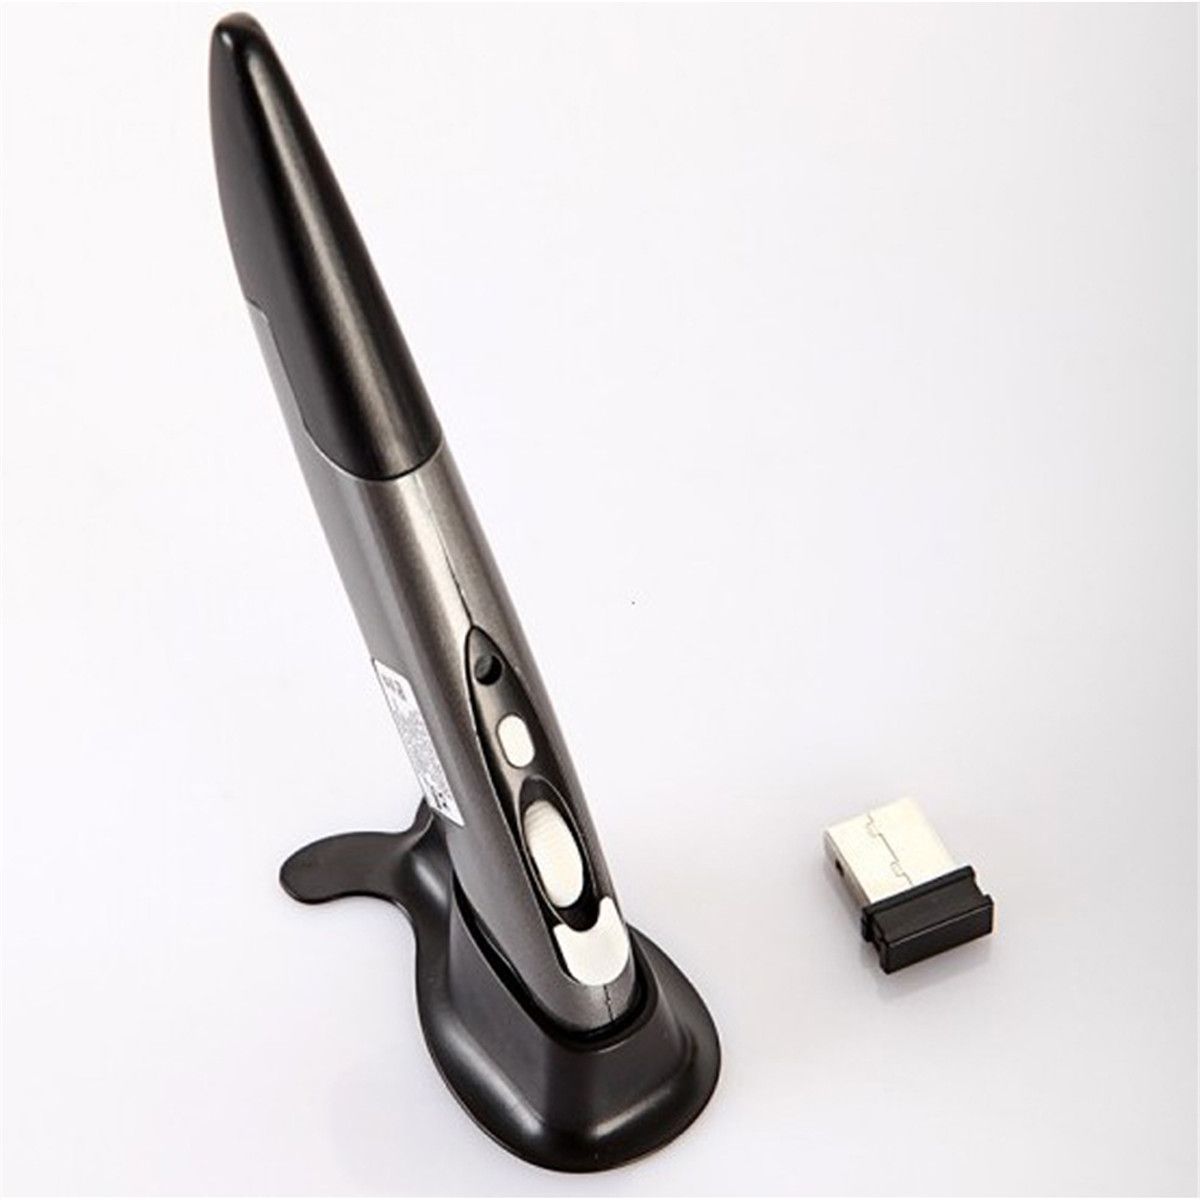 PR-06-24GHz-Optical-USB-Wireless-Pen-Mouse-for-Pocket-PC-Laptop--Mice-Drawing-Pointing-Design-1521509